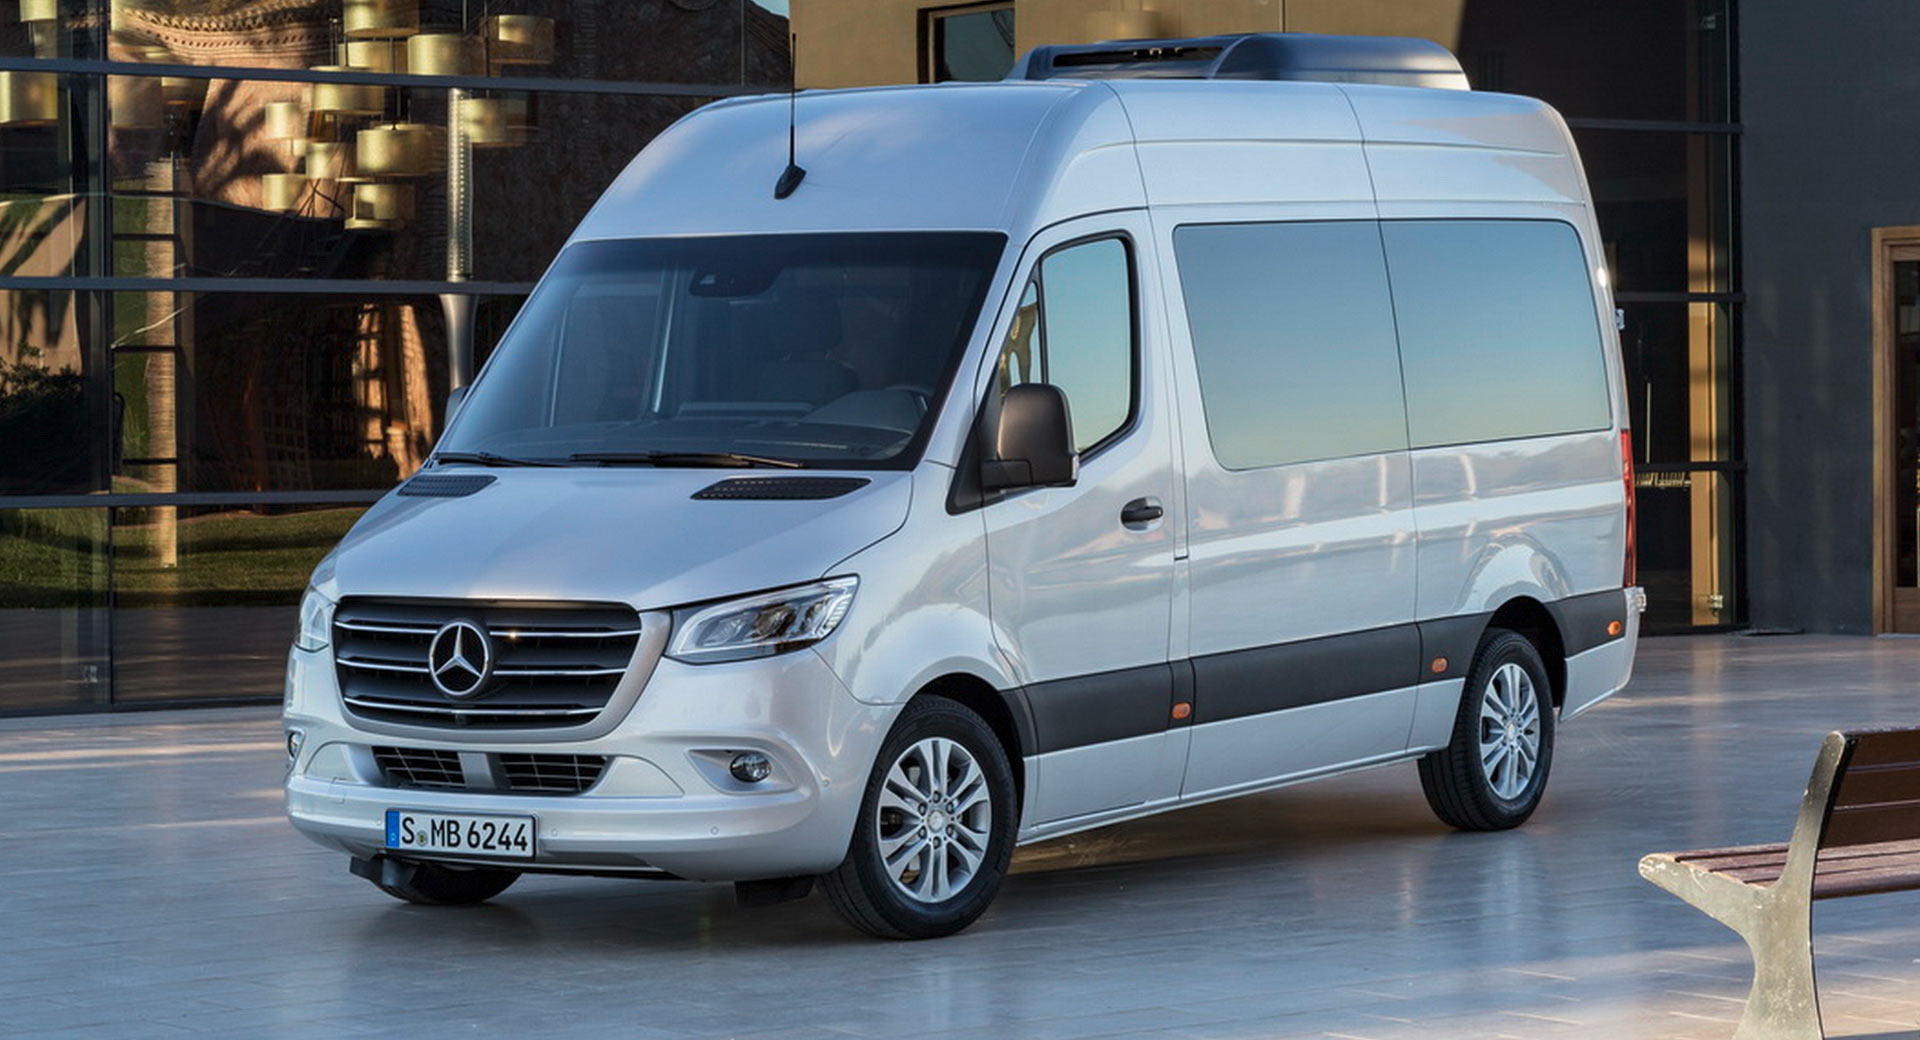 2018 Mercedes Sprinter: Here's Your All-New Fully Connected Premium Van |  Carscoops